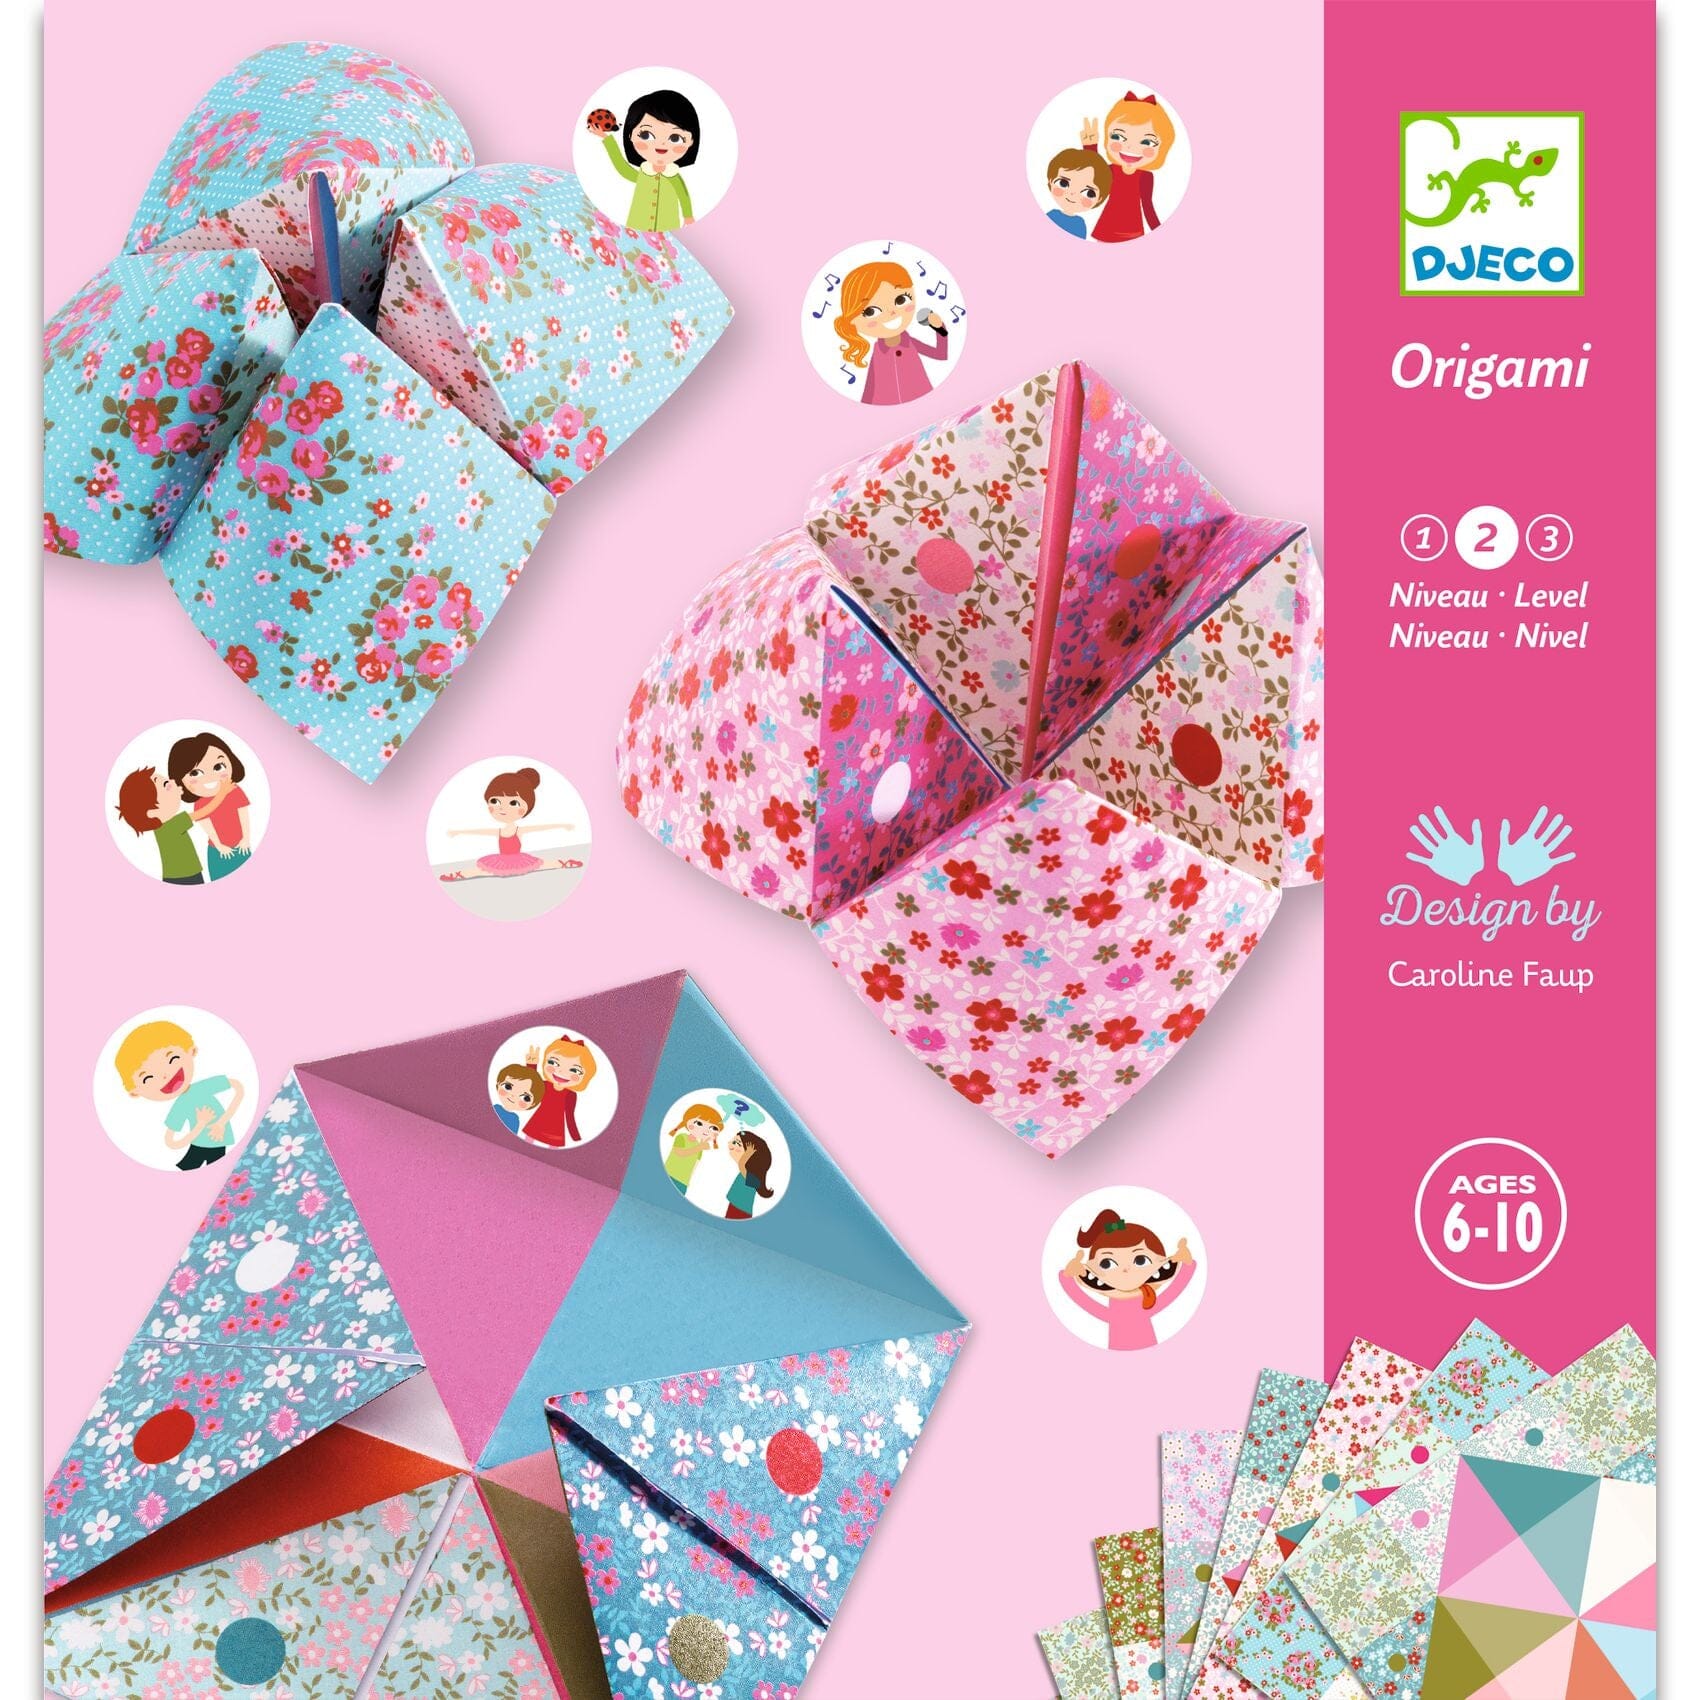 Origami cocottes a gages - Djeco DJ08773 3070900087736